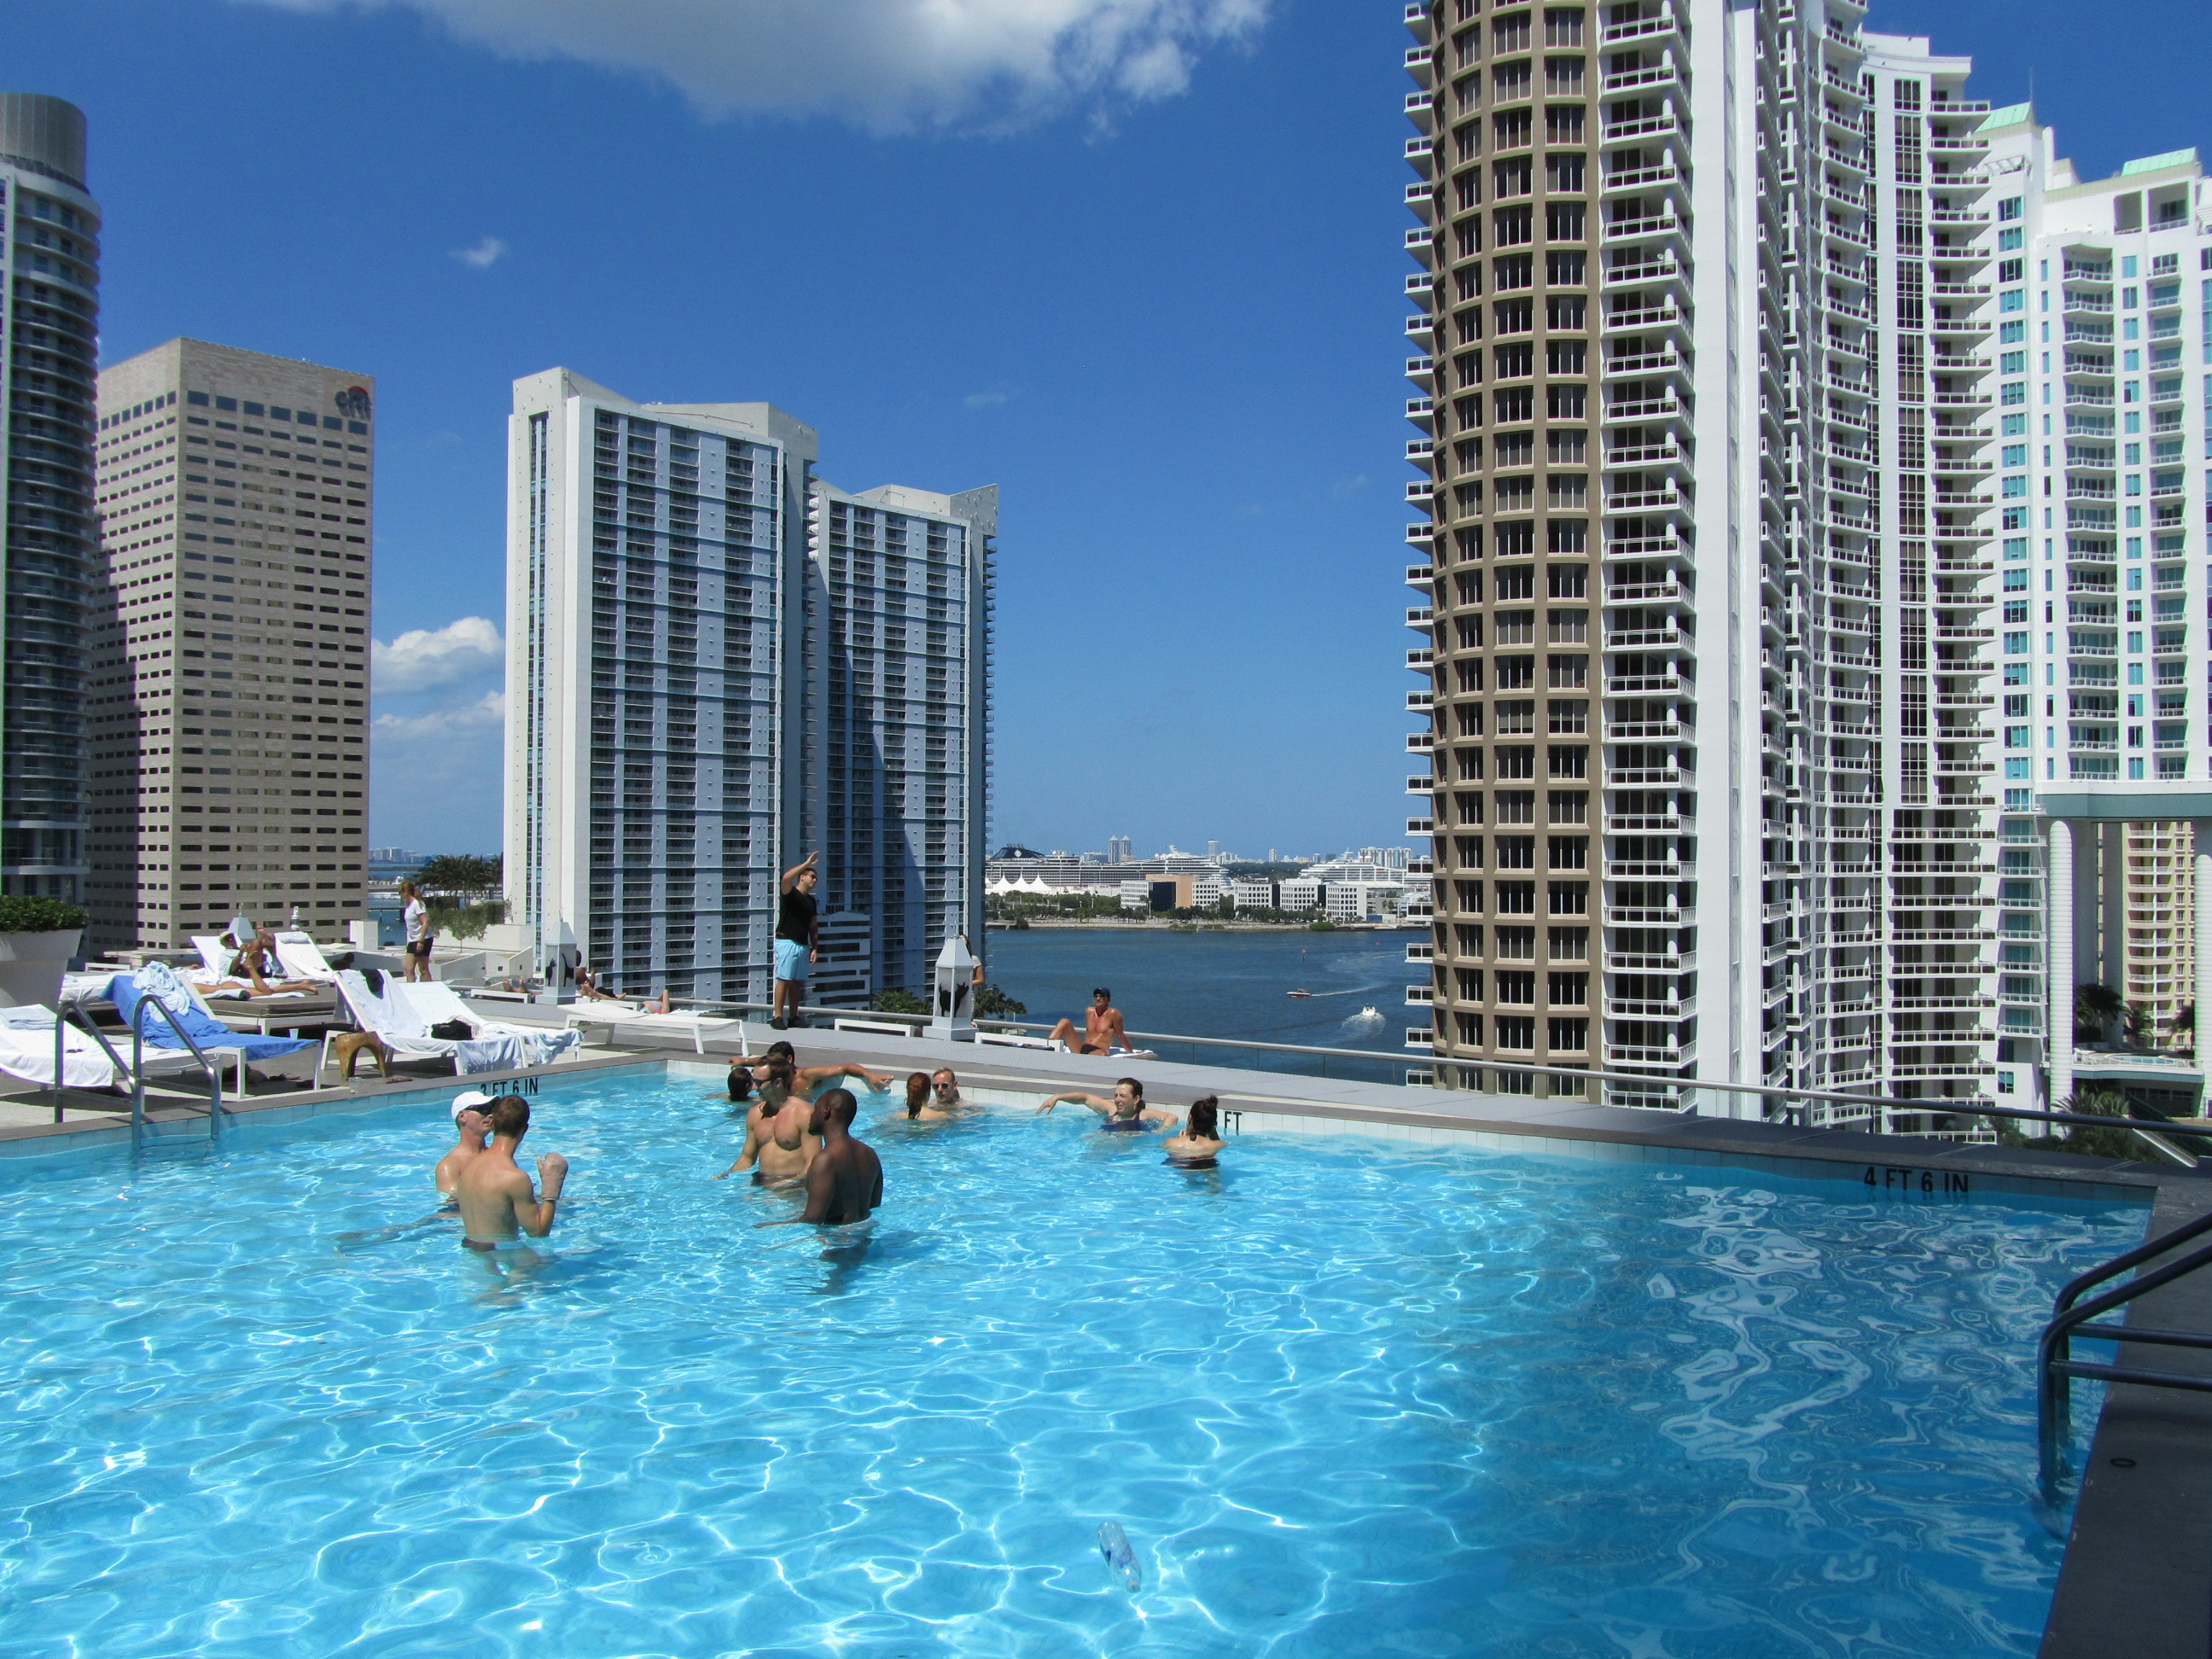 hotels in miami cruise port